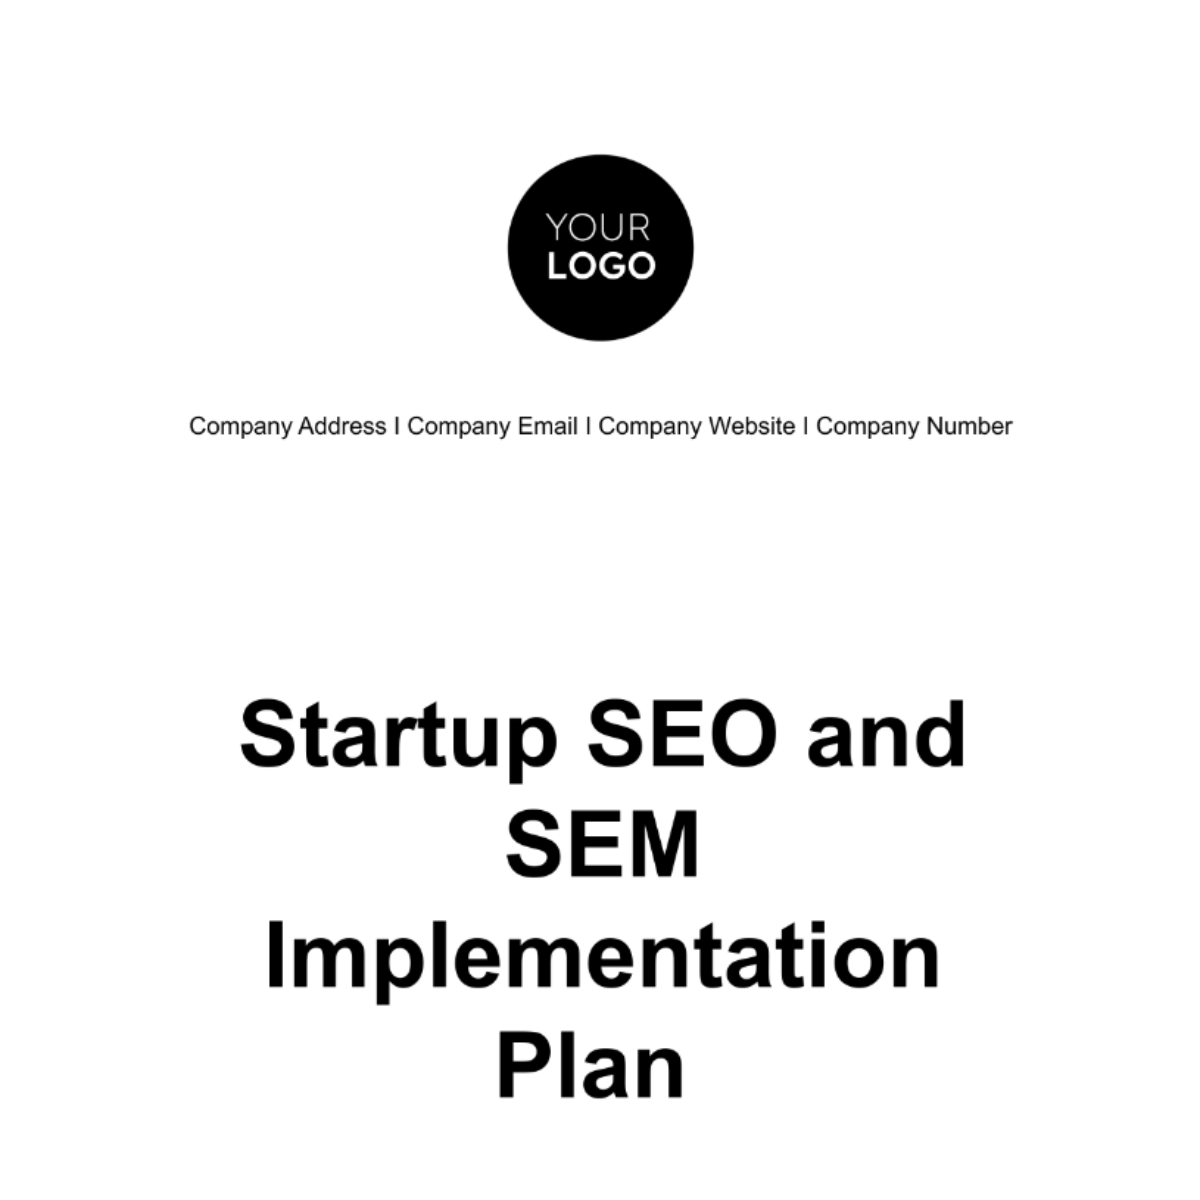 Startup SEO and SEM Implementation Plan Template